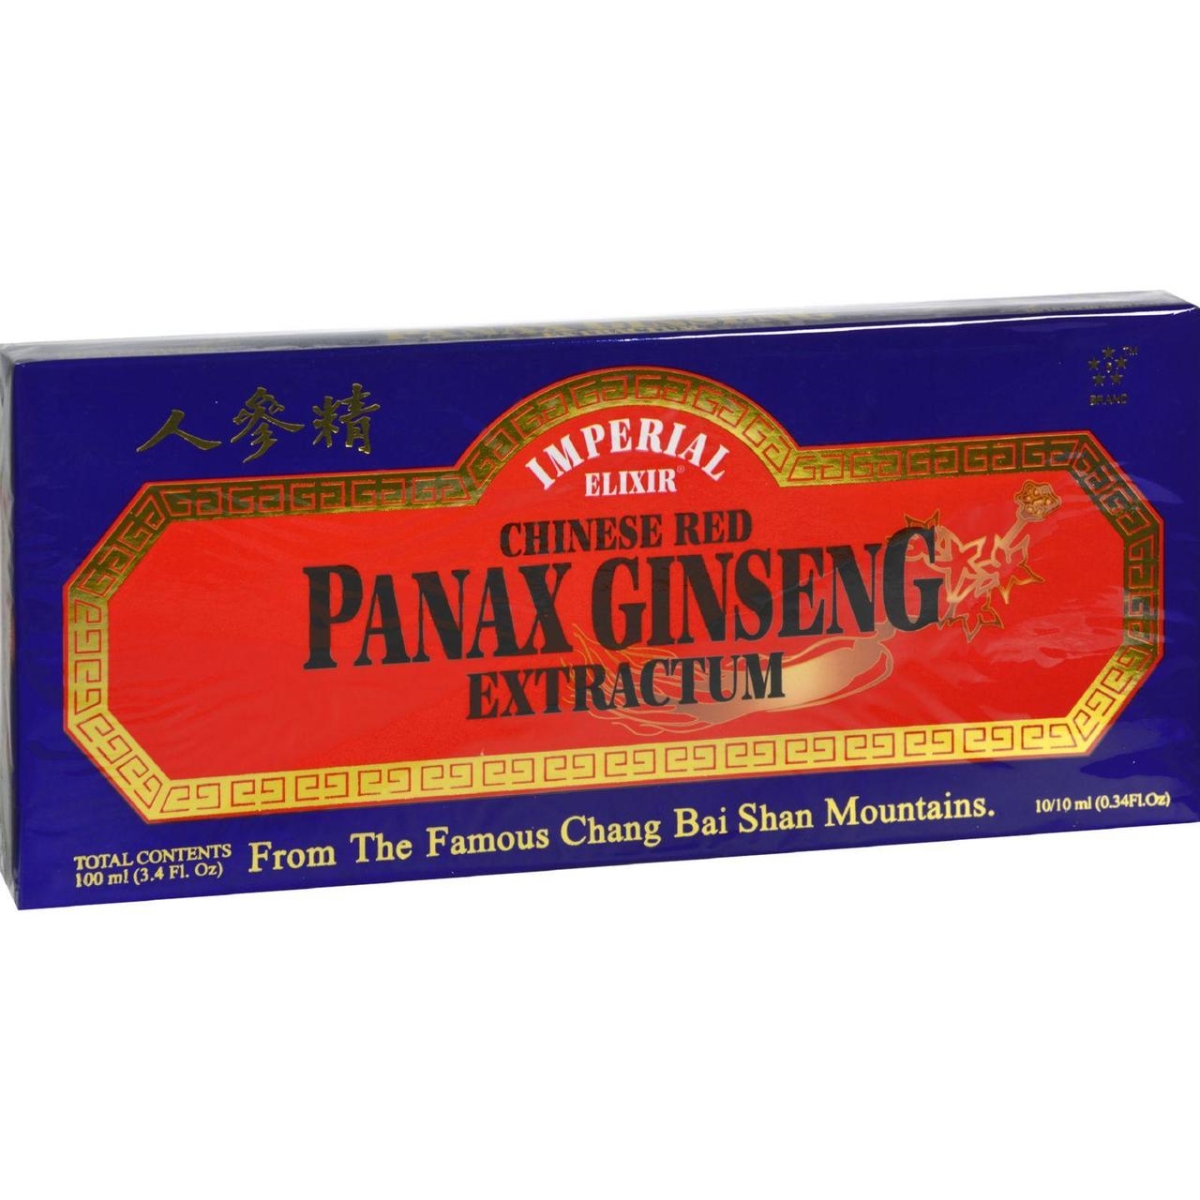 Hg0738351 10 Ml Chinese Red Panax Ginseng Extractum - 10 Bottles